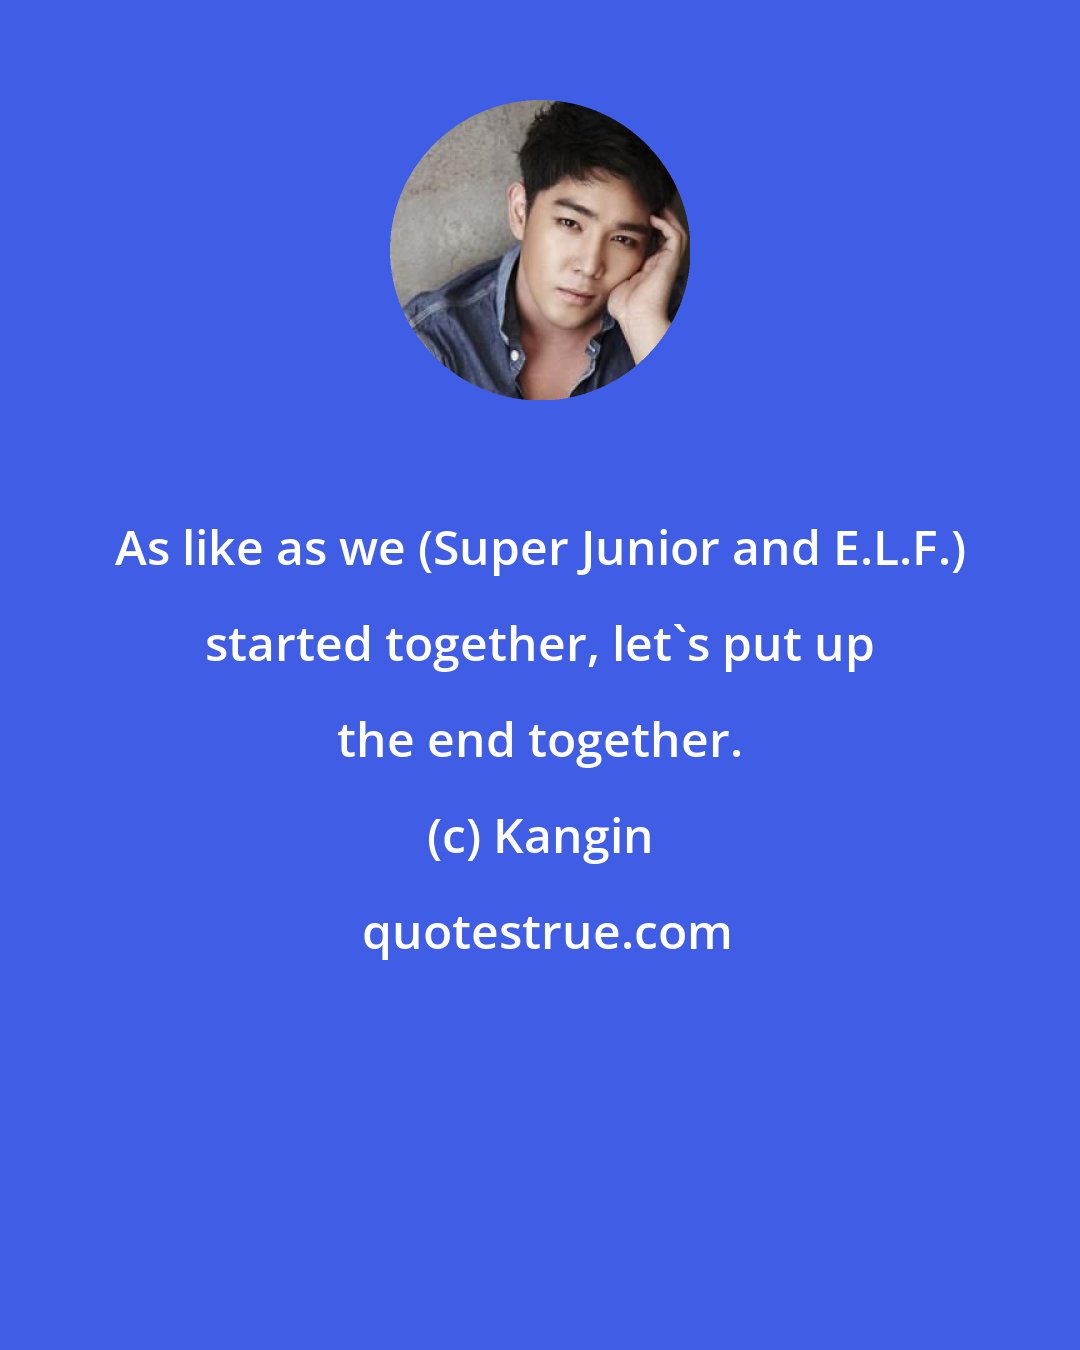 Kangin: As like as we (Super Junior and E.L.F.) started together, let's put up the end together.